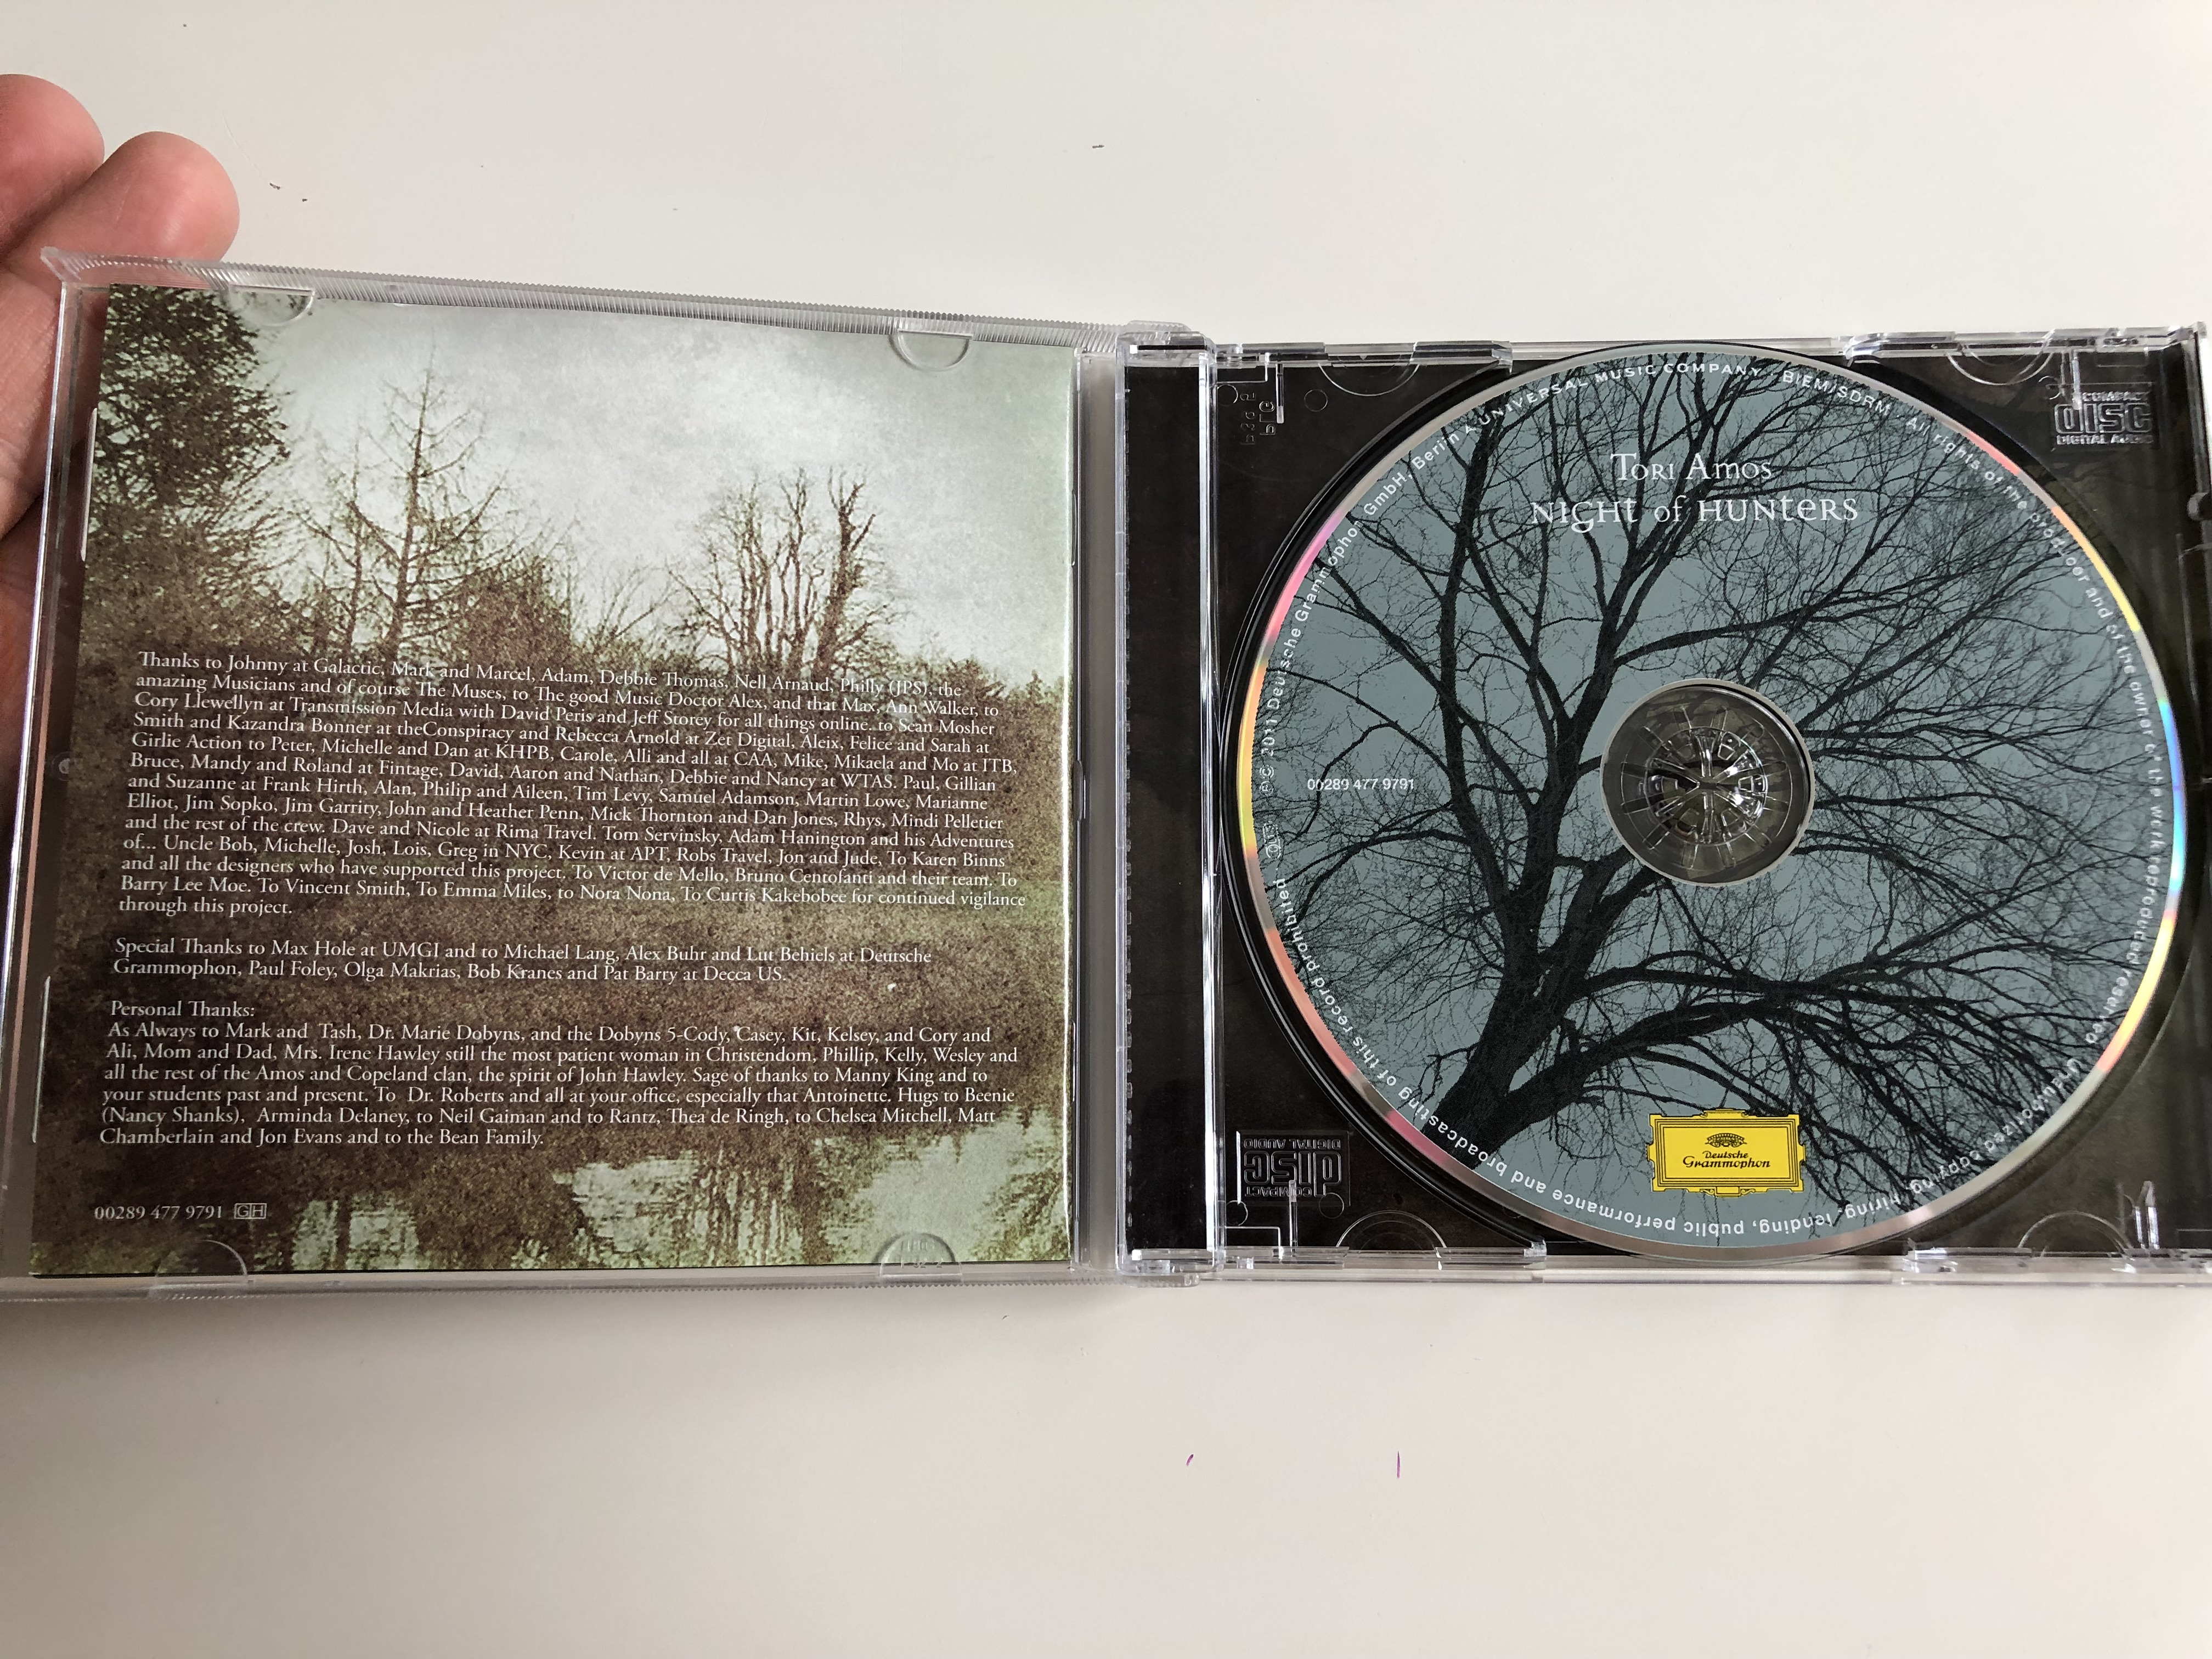 tori-amos-night-of-hunters-snowblind-fearlessness-job-s-coffin-the-chase-seven-sisters-audio-cd-2011-2-.jpg